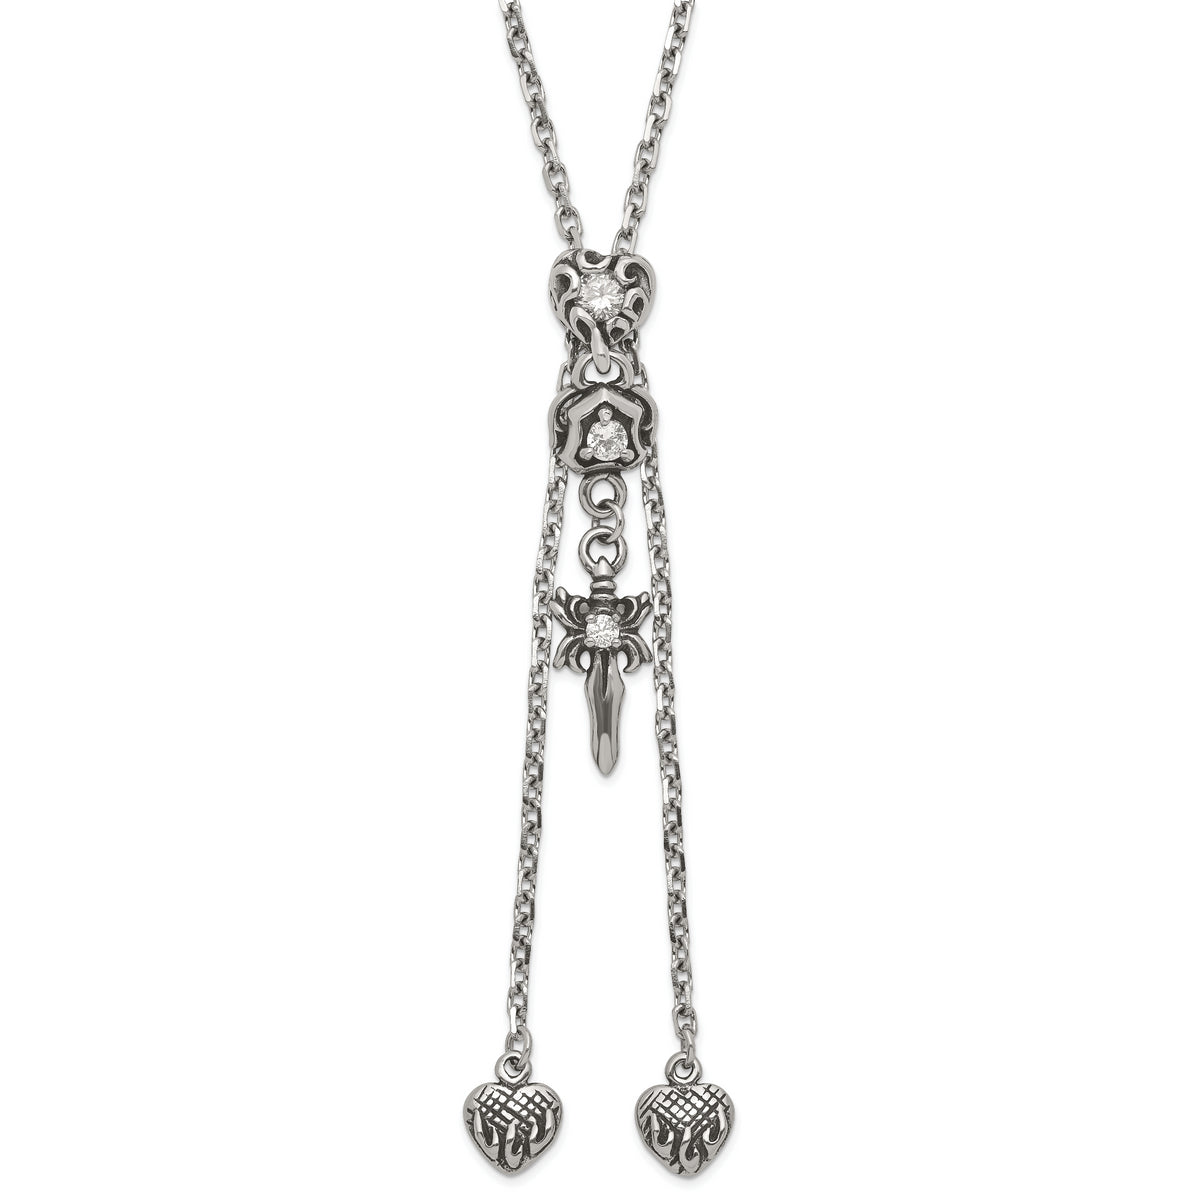 Stainless Steel Polished & Antiqued CZ Gothic Hearts & Sword Adjustable Necklace